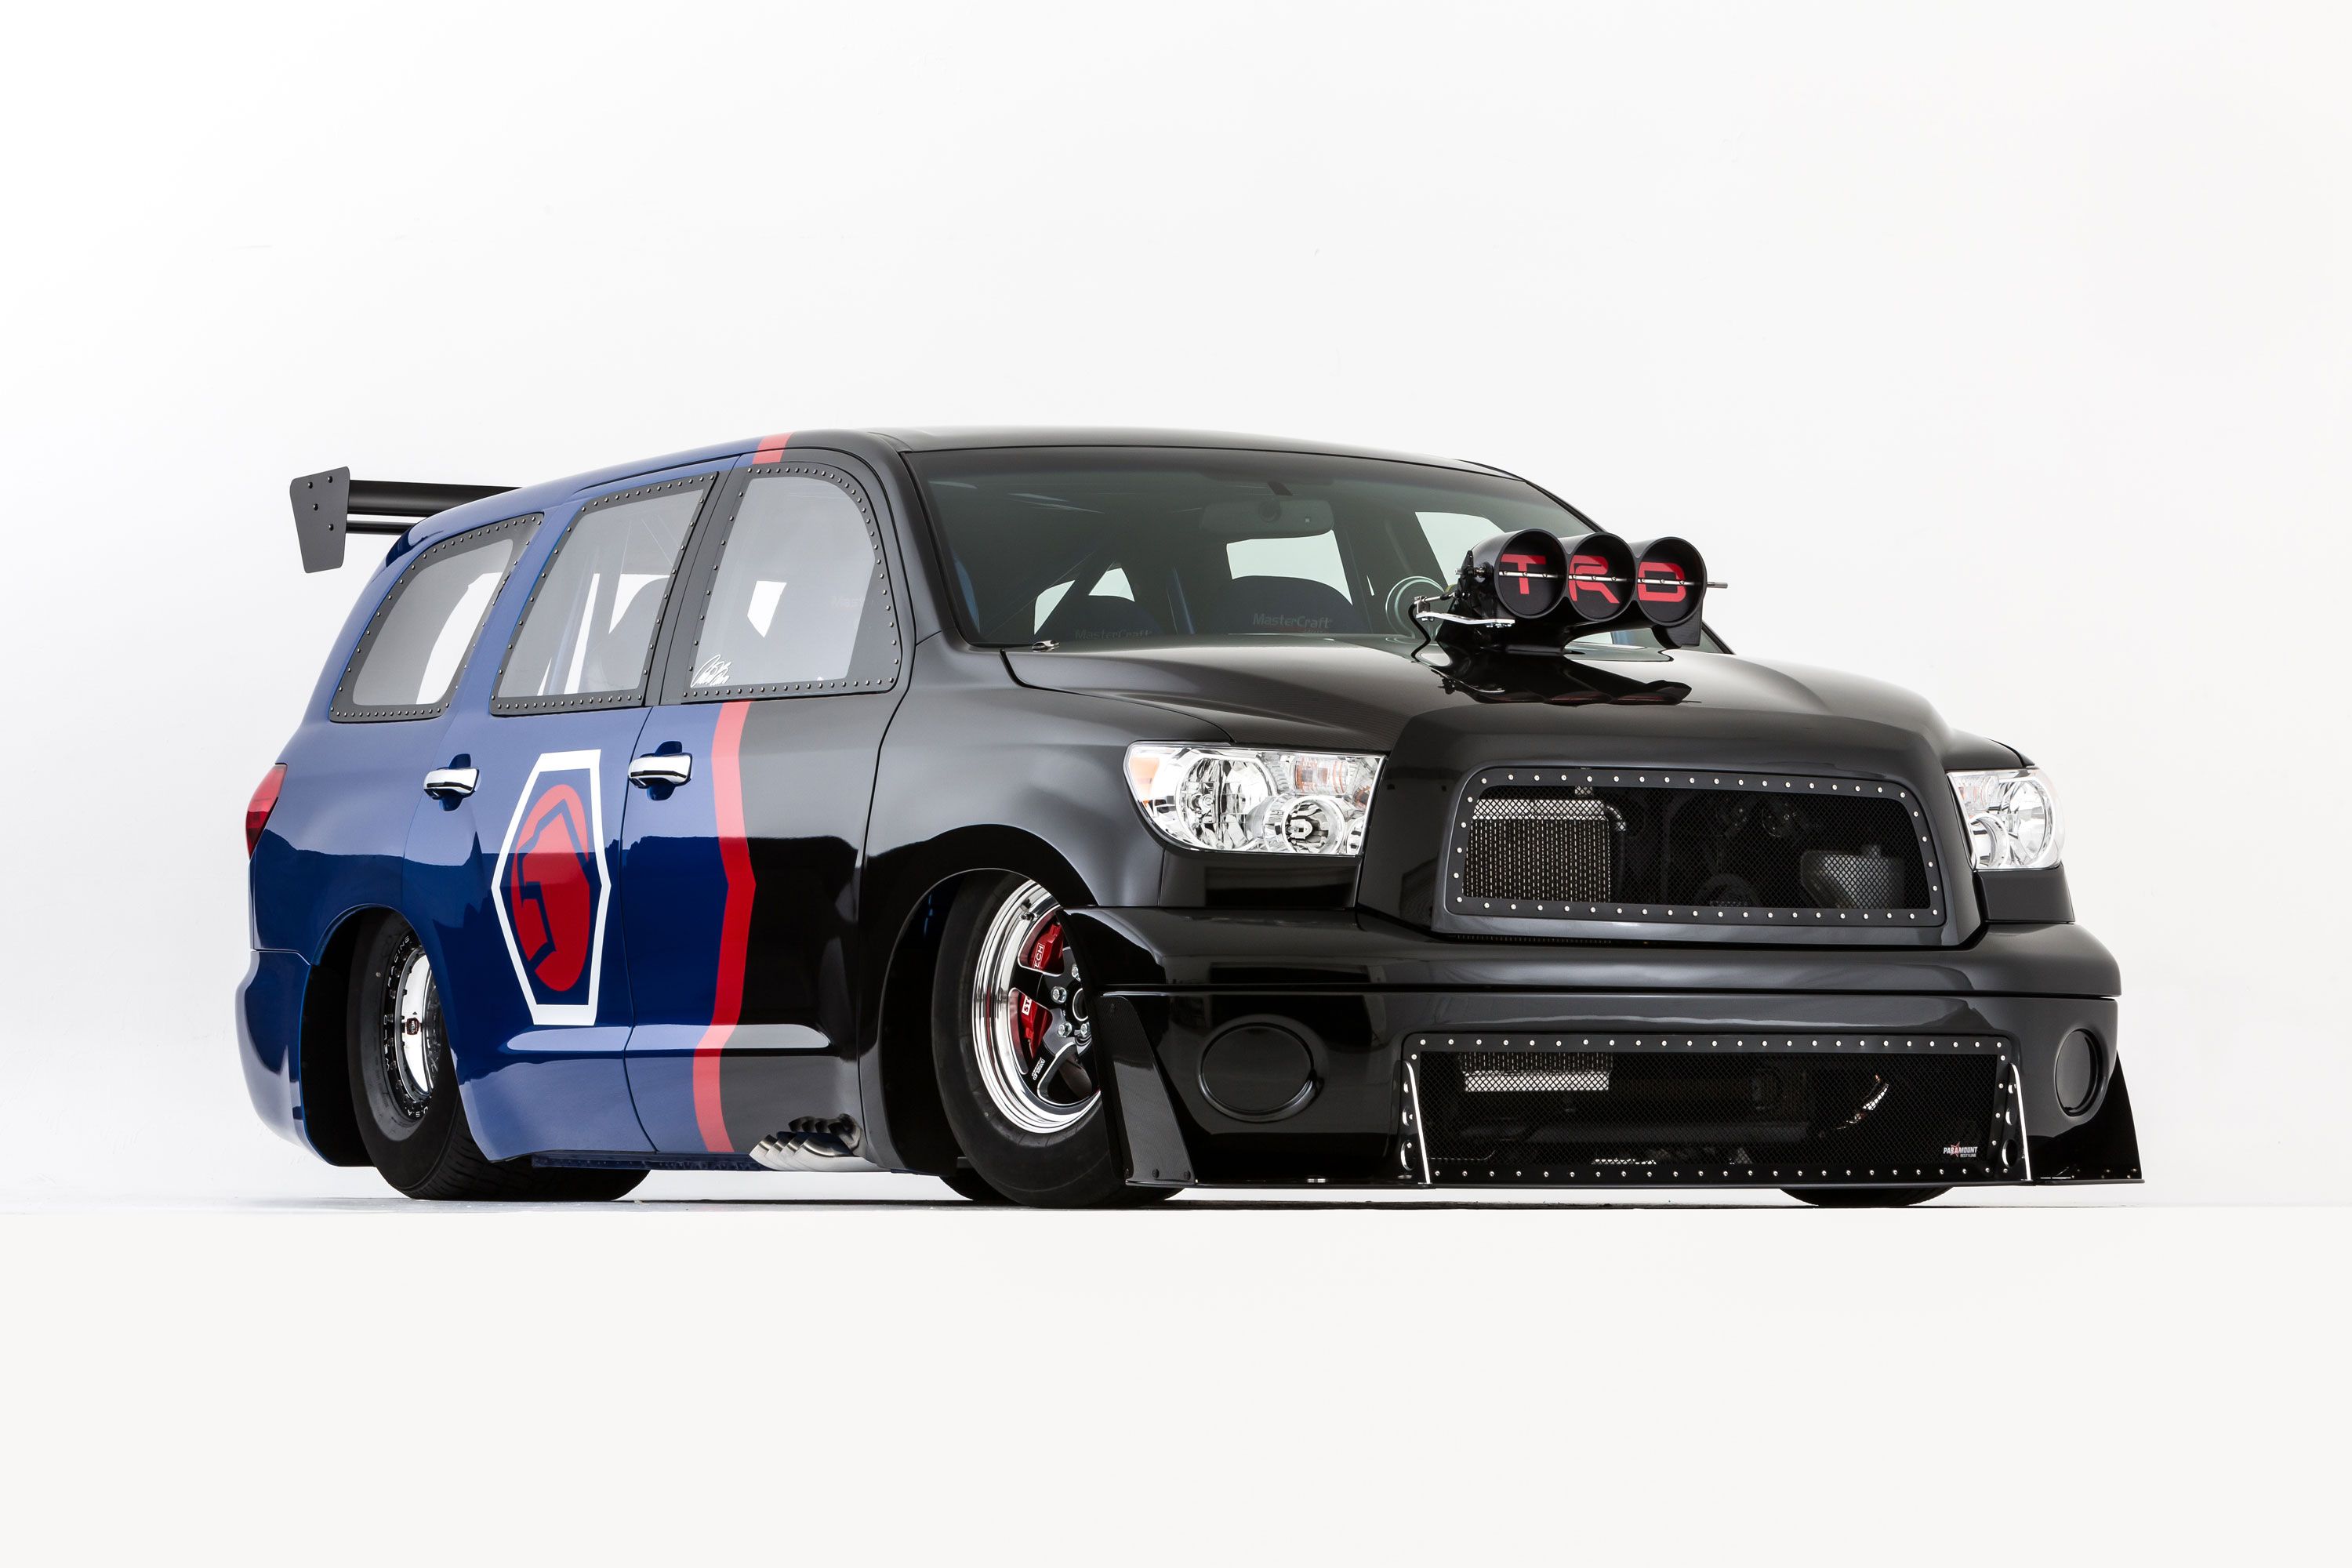 2013 Toyota Sequoia Family Dragster Concept by Antron Brown